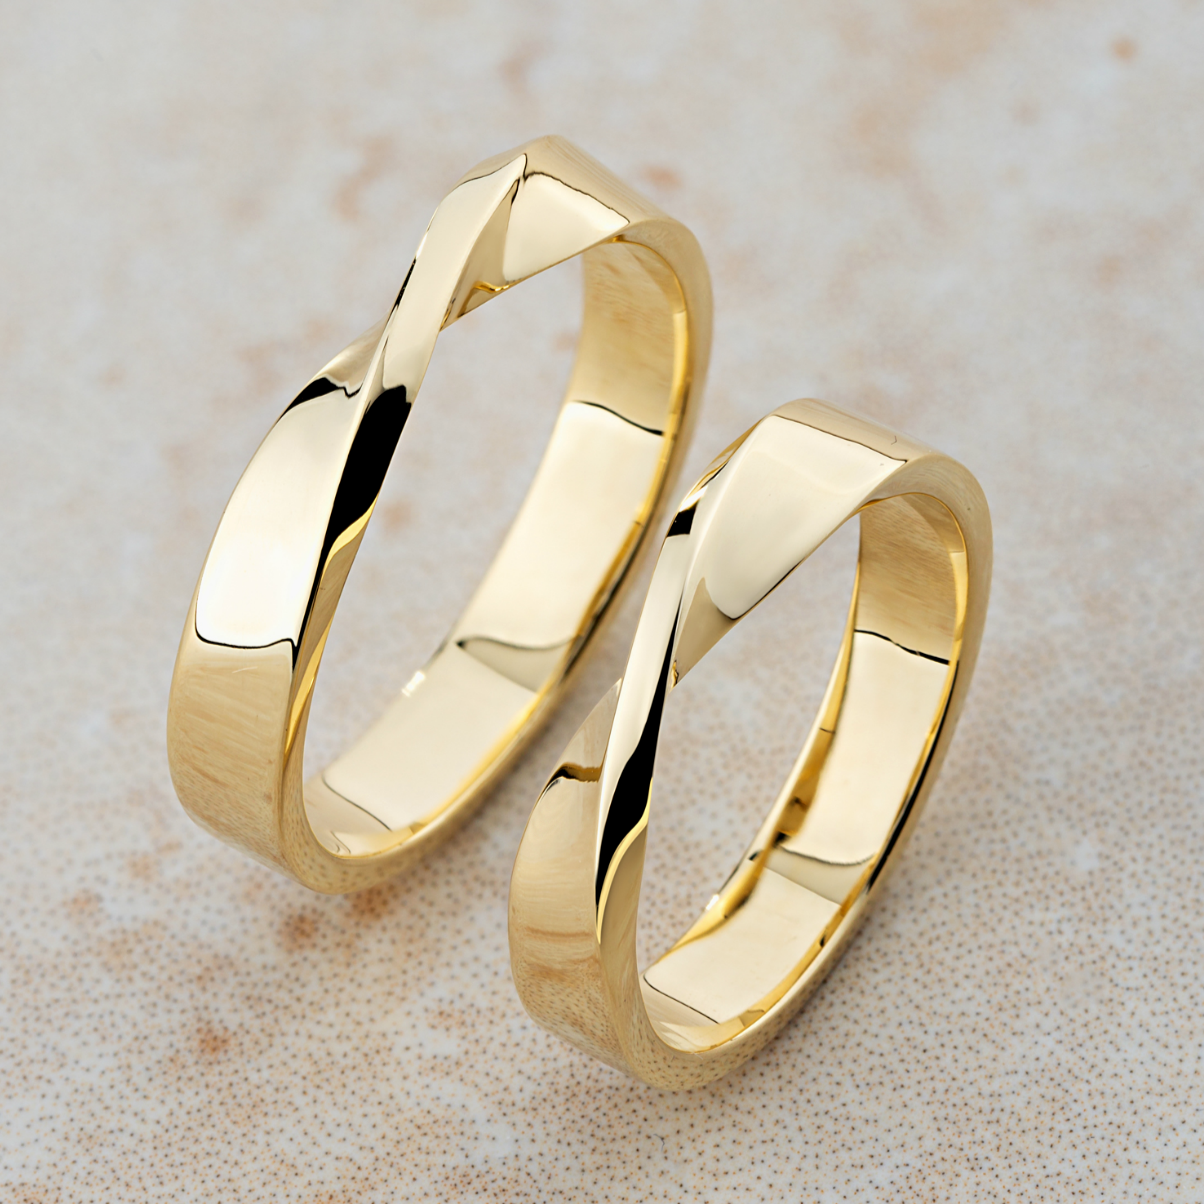 Matching Mobius Wedding Bands. His and Hers Mobius wedding rings set. Gold Mobius Rings. Couple rings set. His and hers matching wedding bands. Gold wedding rings